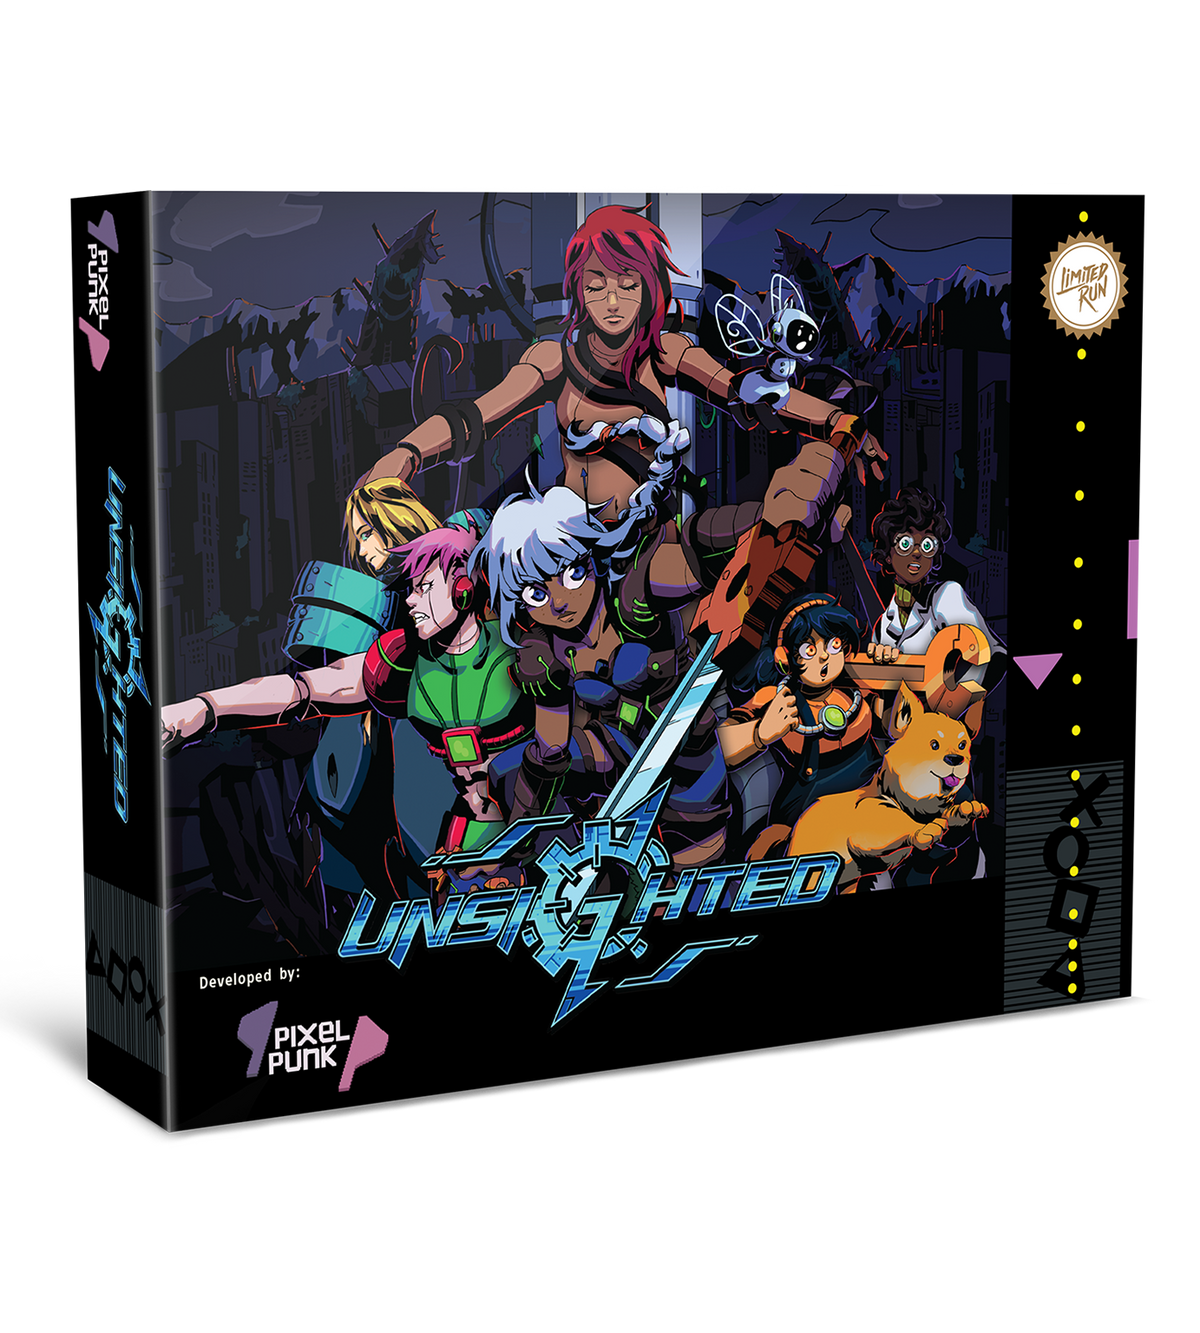 Limited Run #464: UNSIGHTED Collector's Edition (PS4)